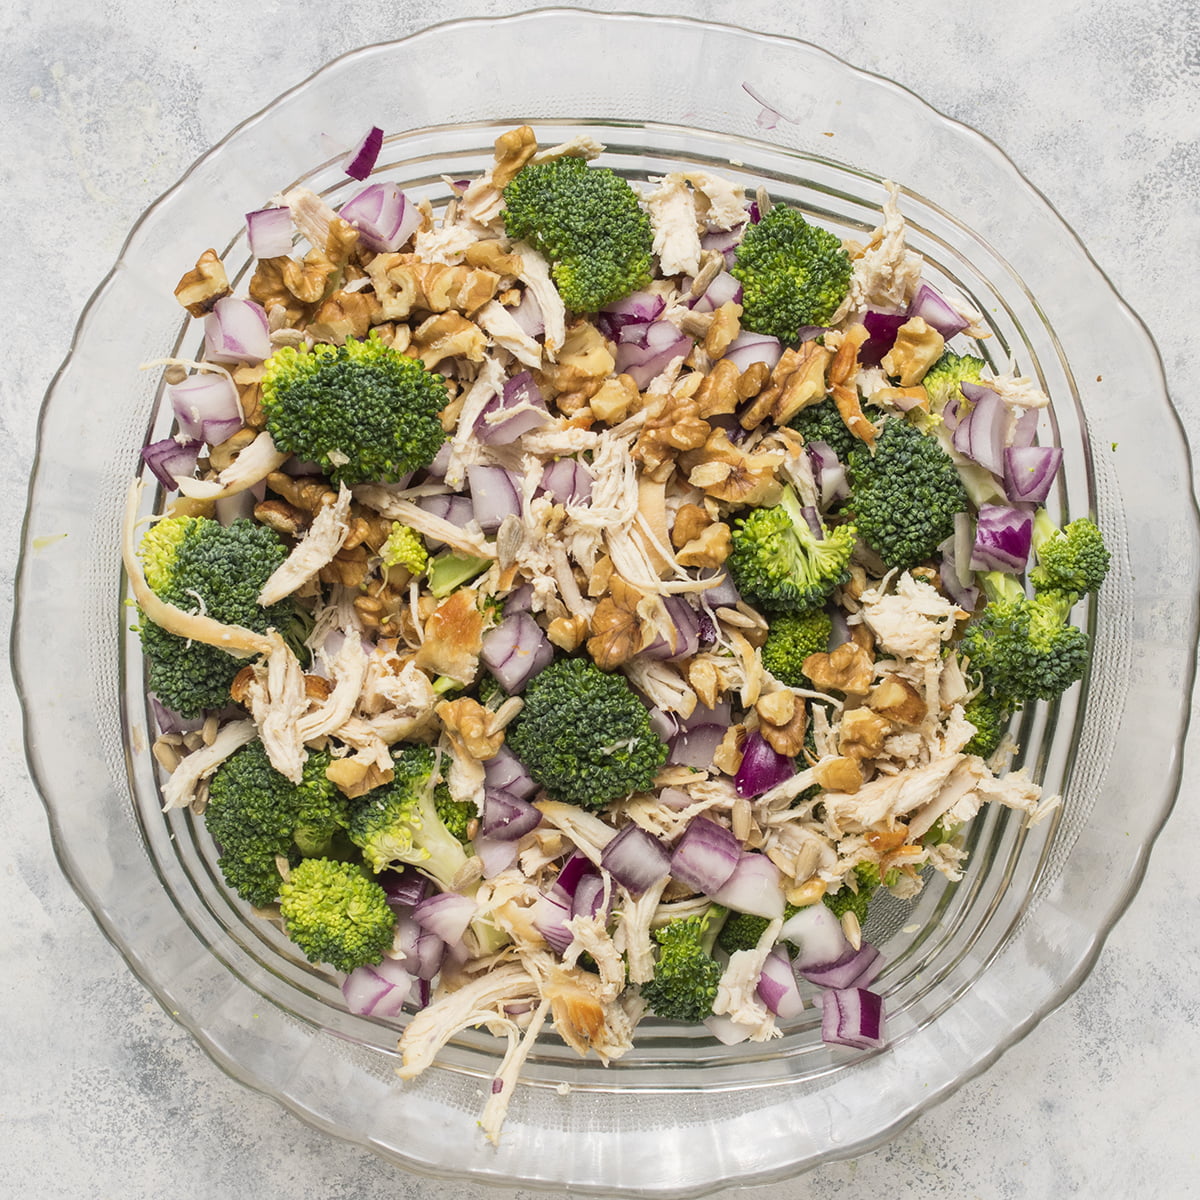 Chicken with the broccoli, sunflower seeds, walnuts, and onions in a large bowl.